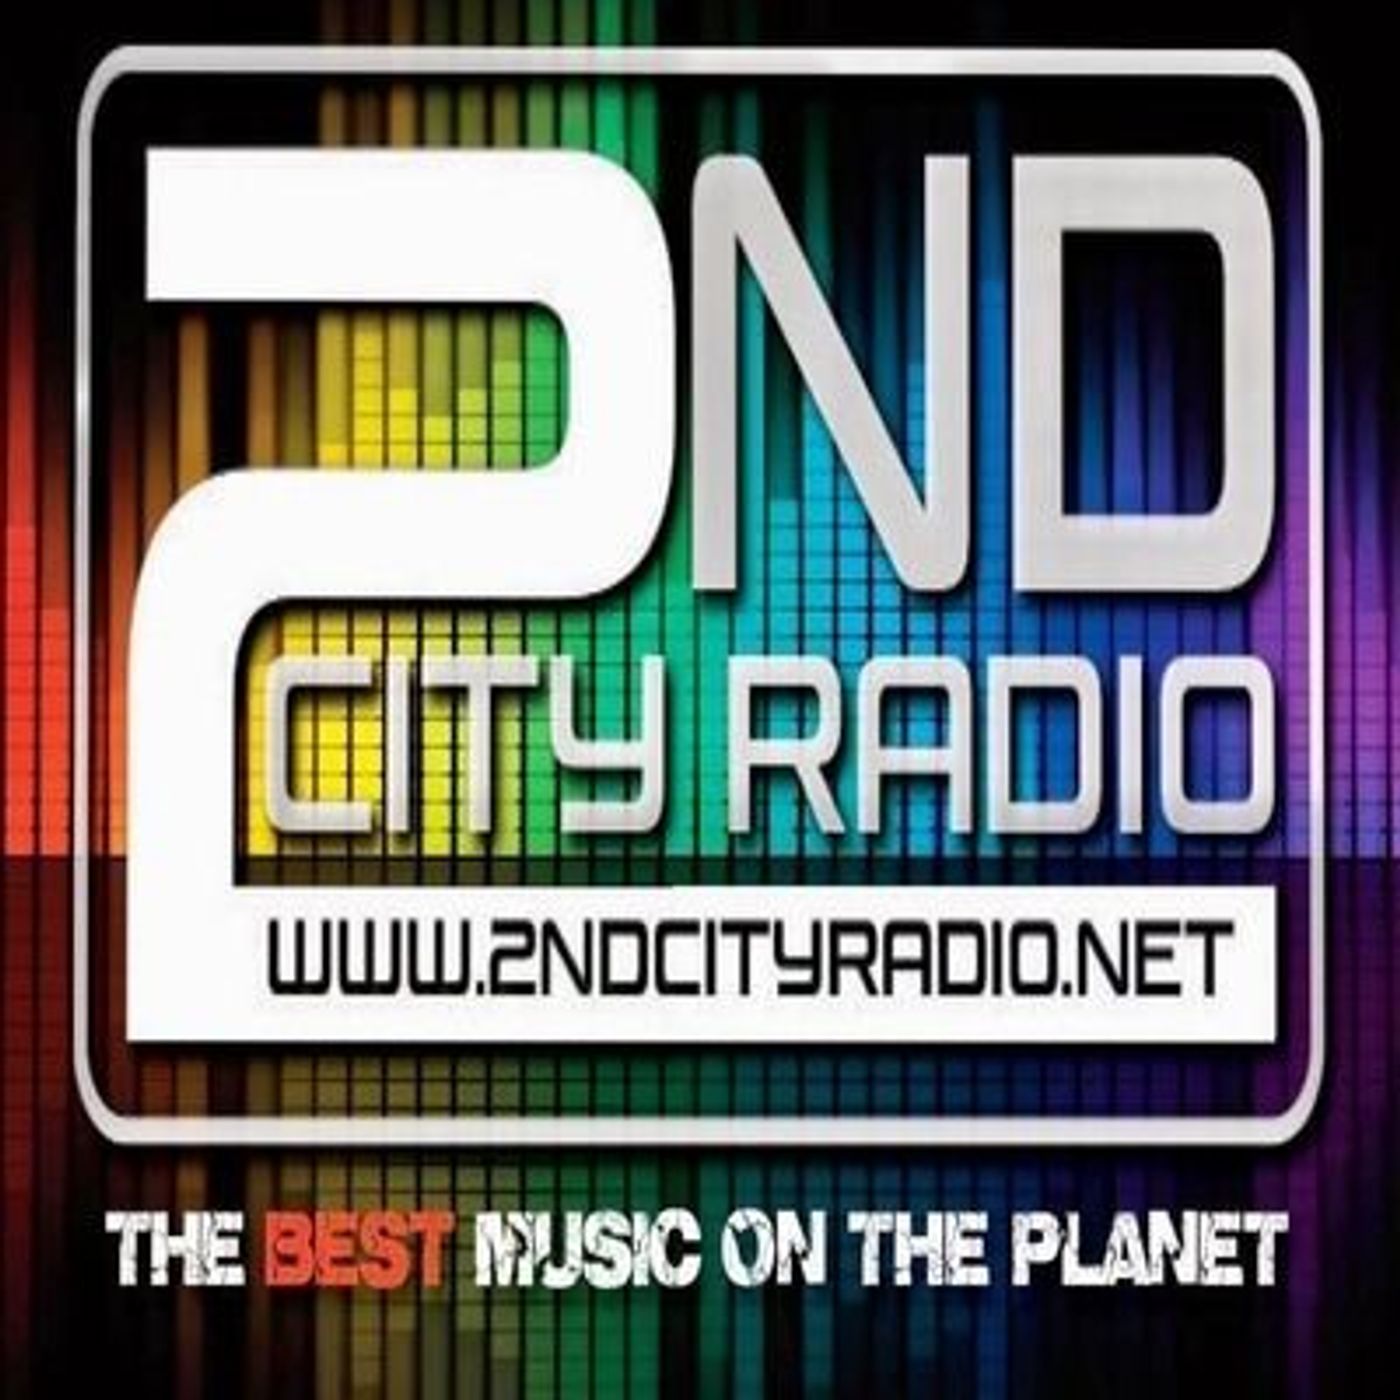 Sunday the 1st of May 2022 on 2ndcity Radio with Classic Chat